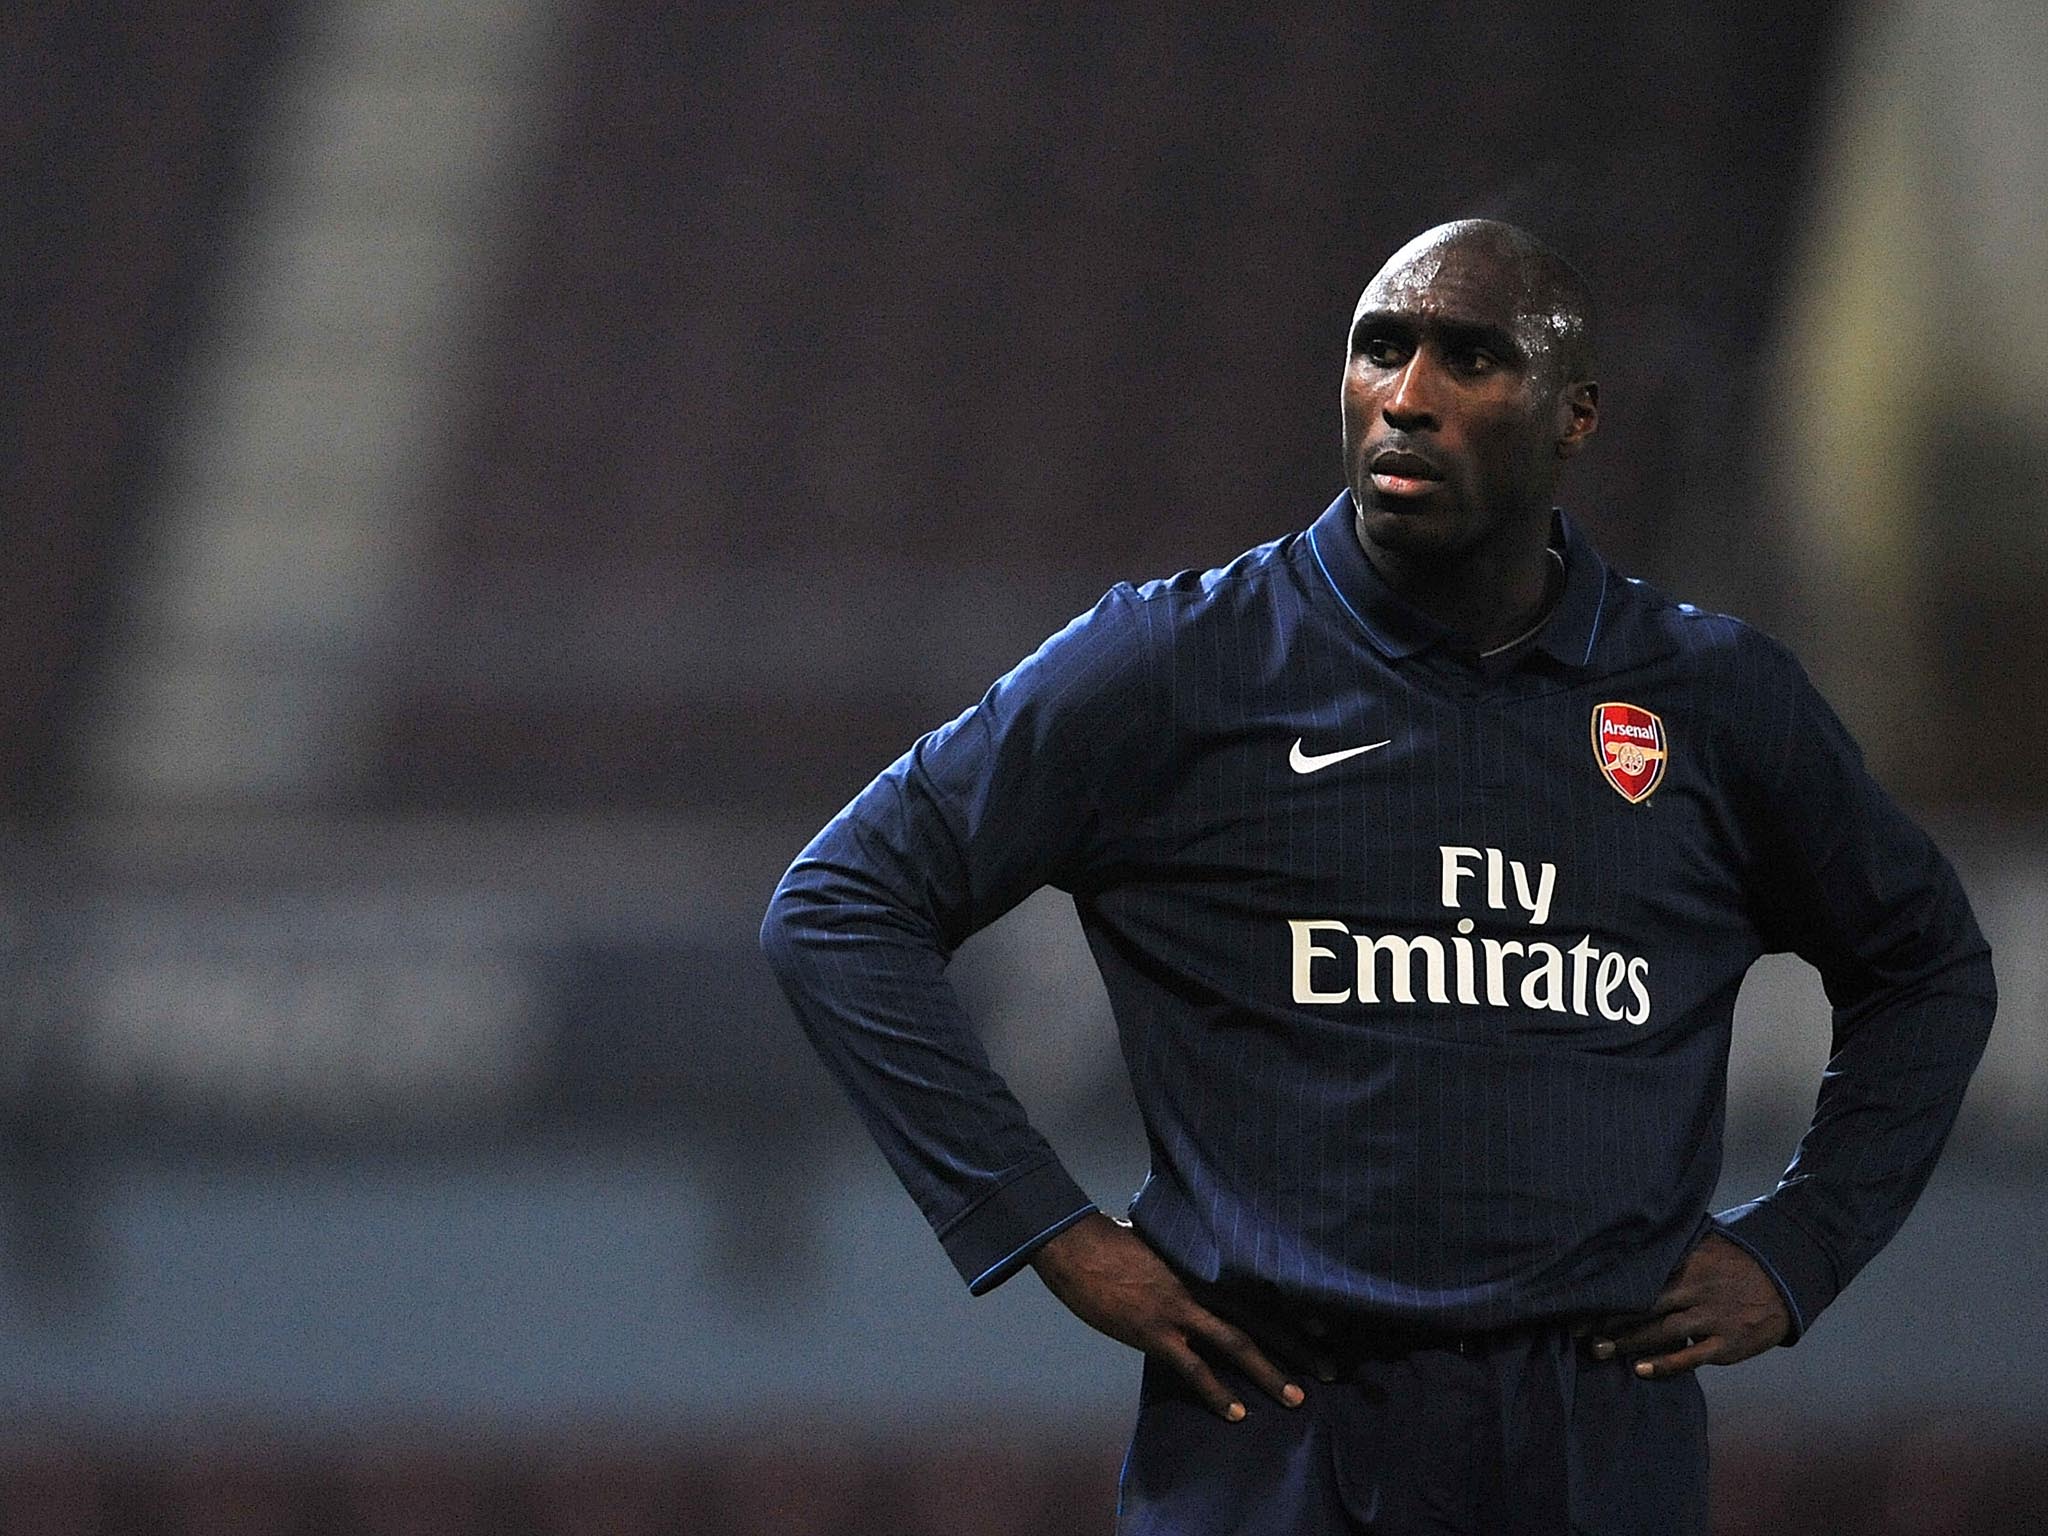 Sol Campbell is a former Arsenal defender